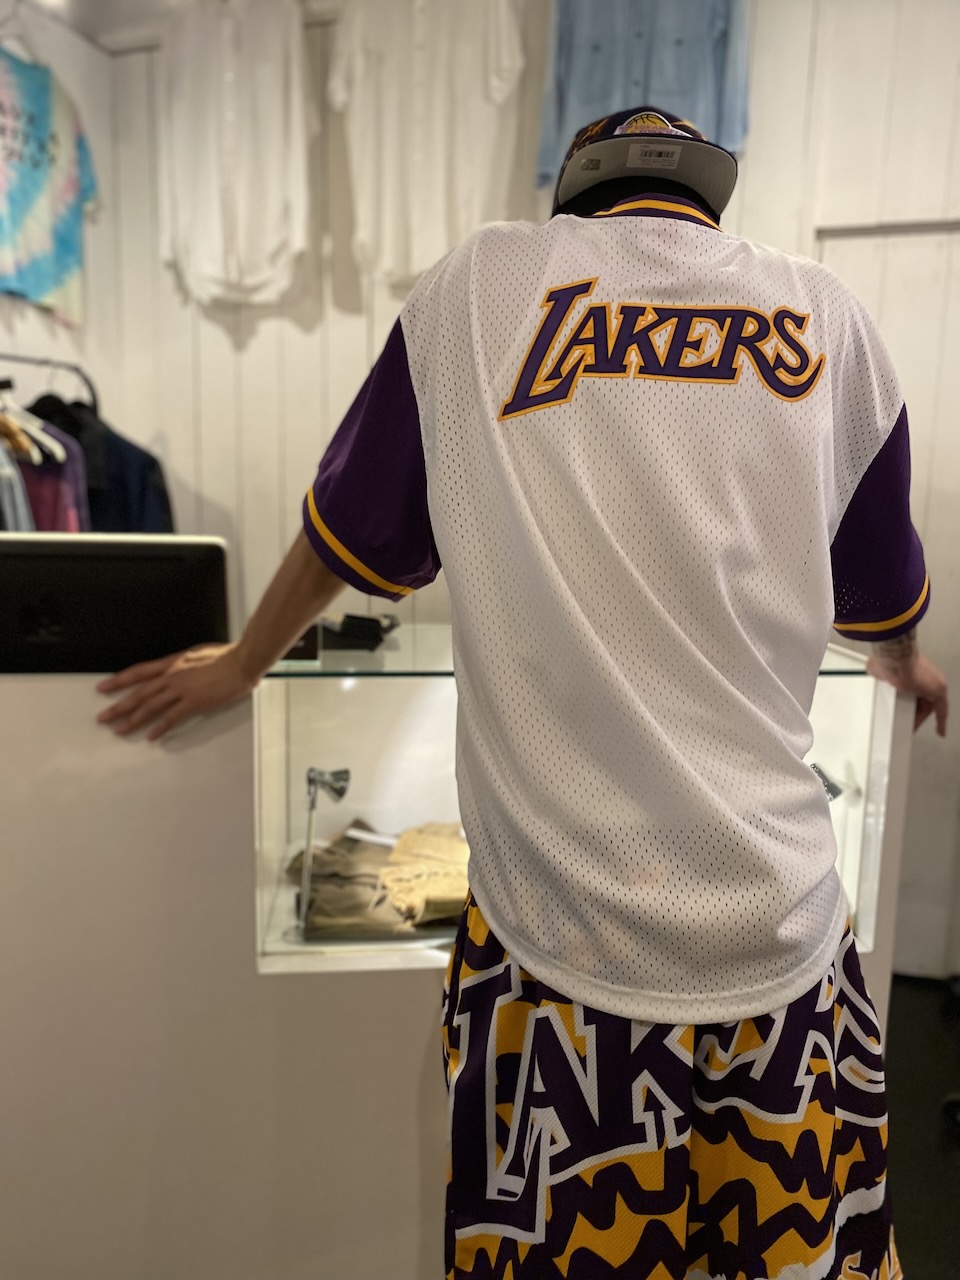 Lakers style